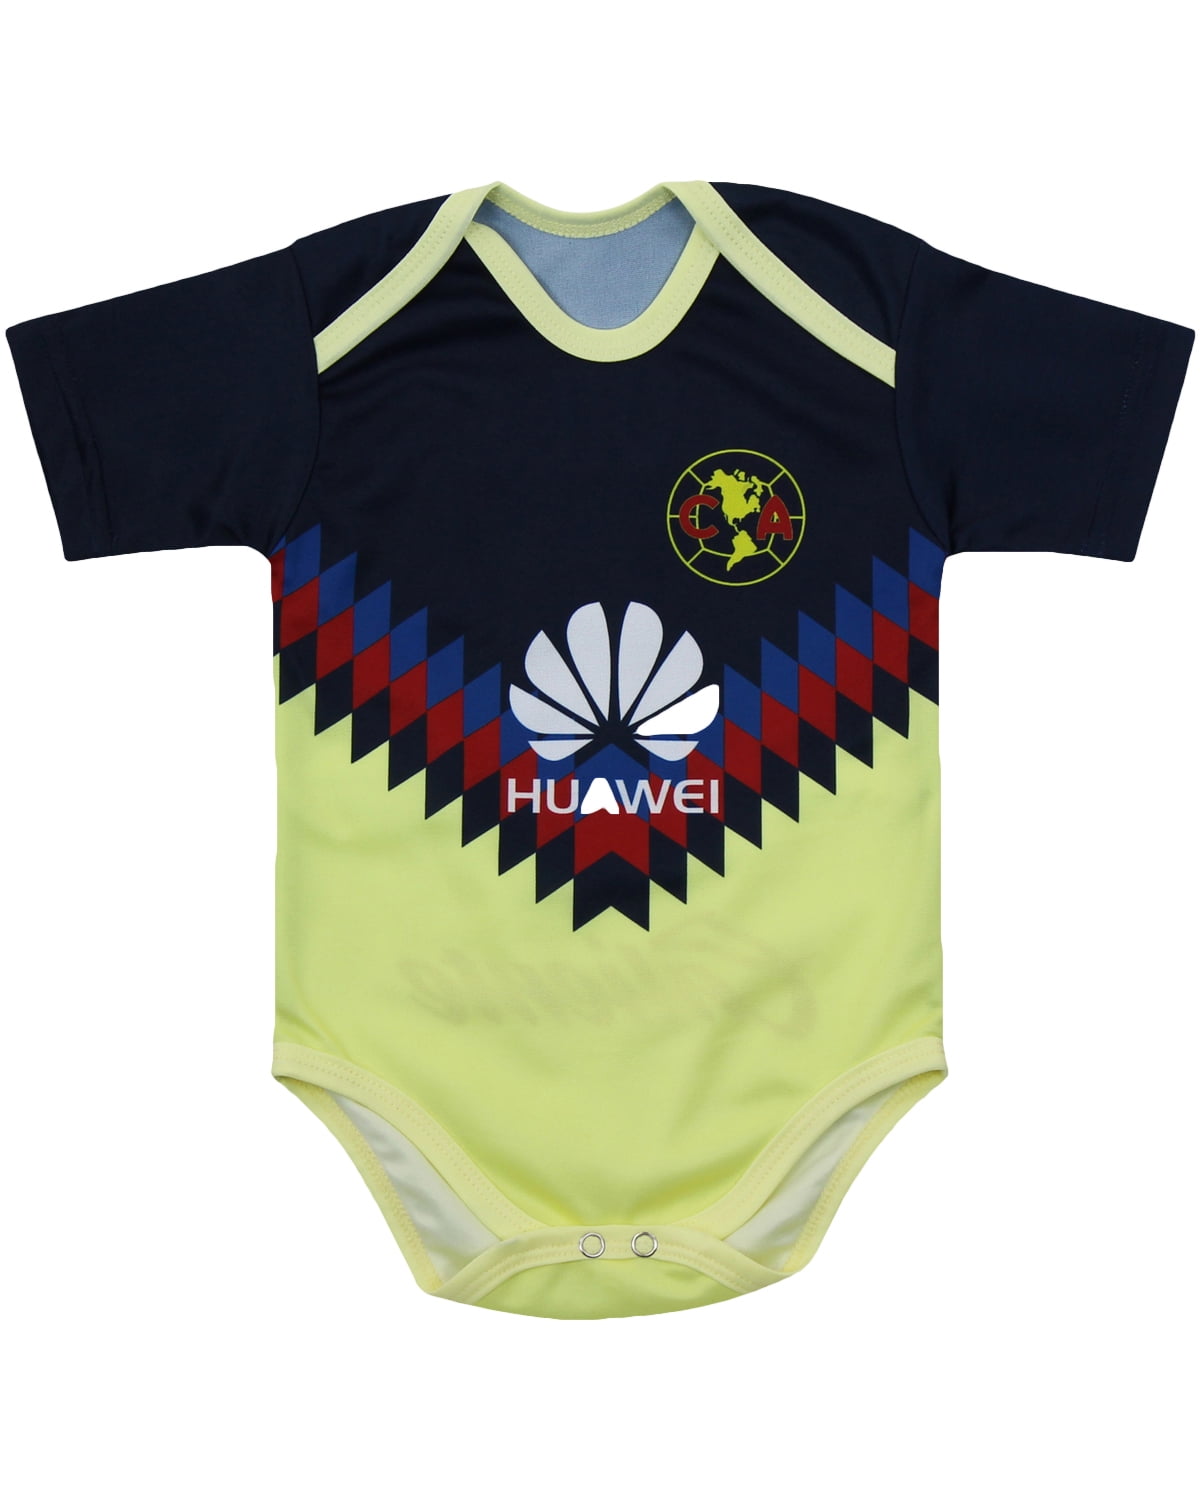 Mexico 2018 baby jersey  #7 Baby Jersey 6-9 months add your baby's name free... 